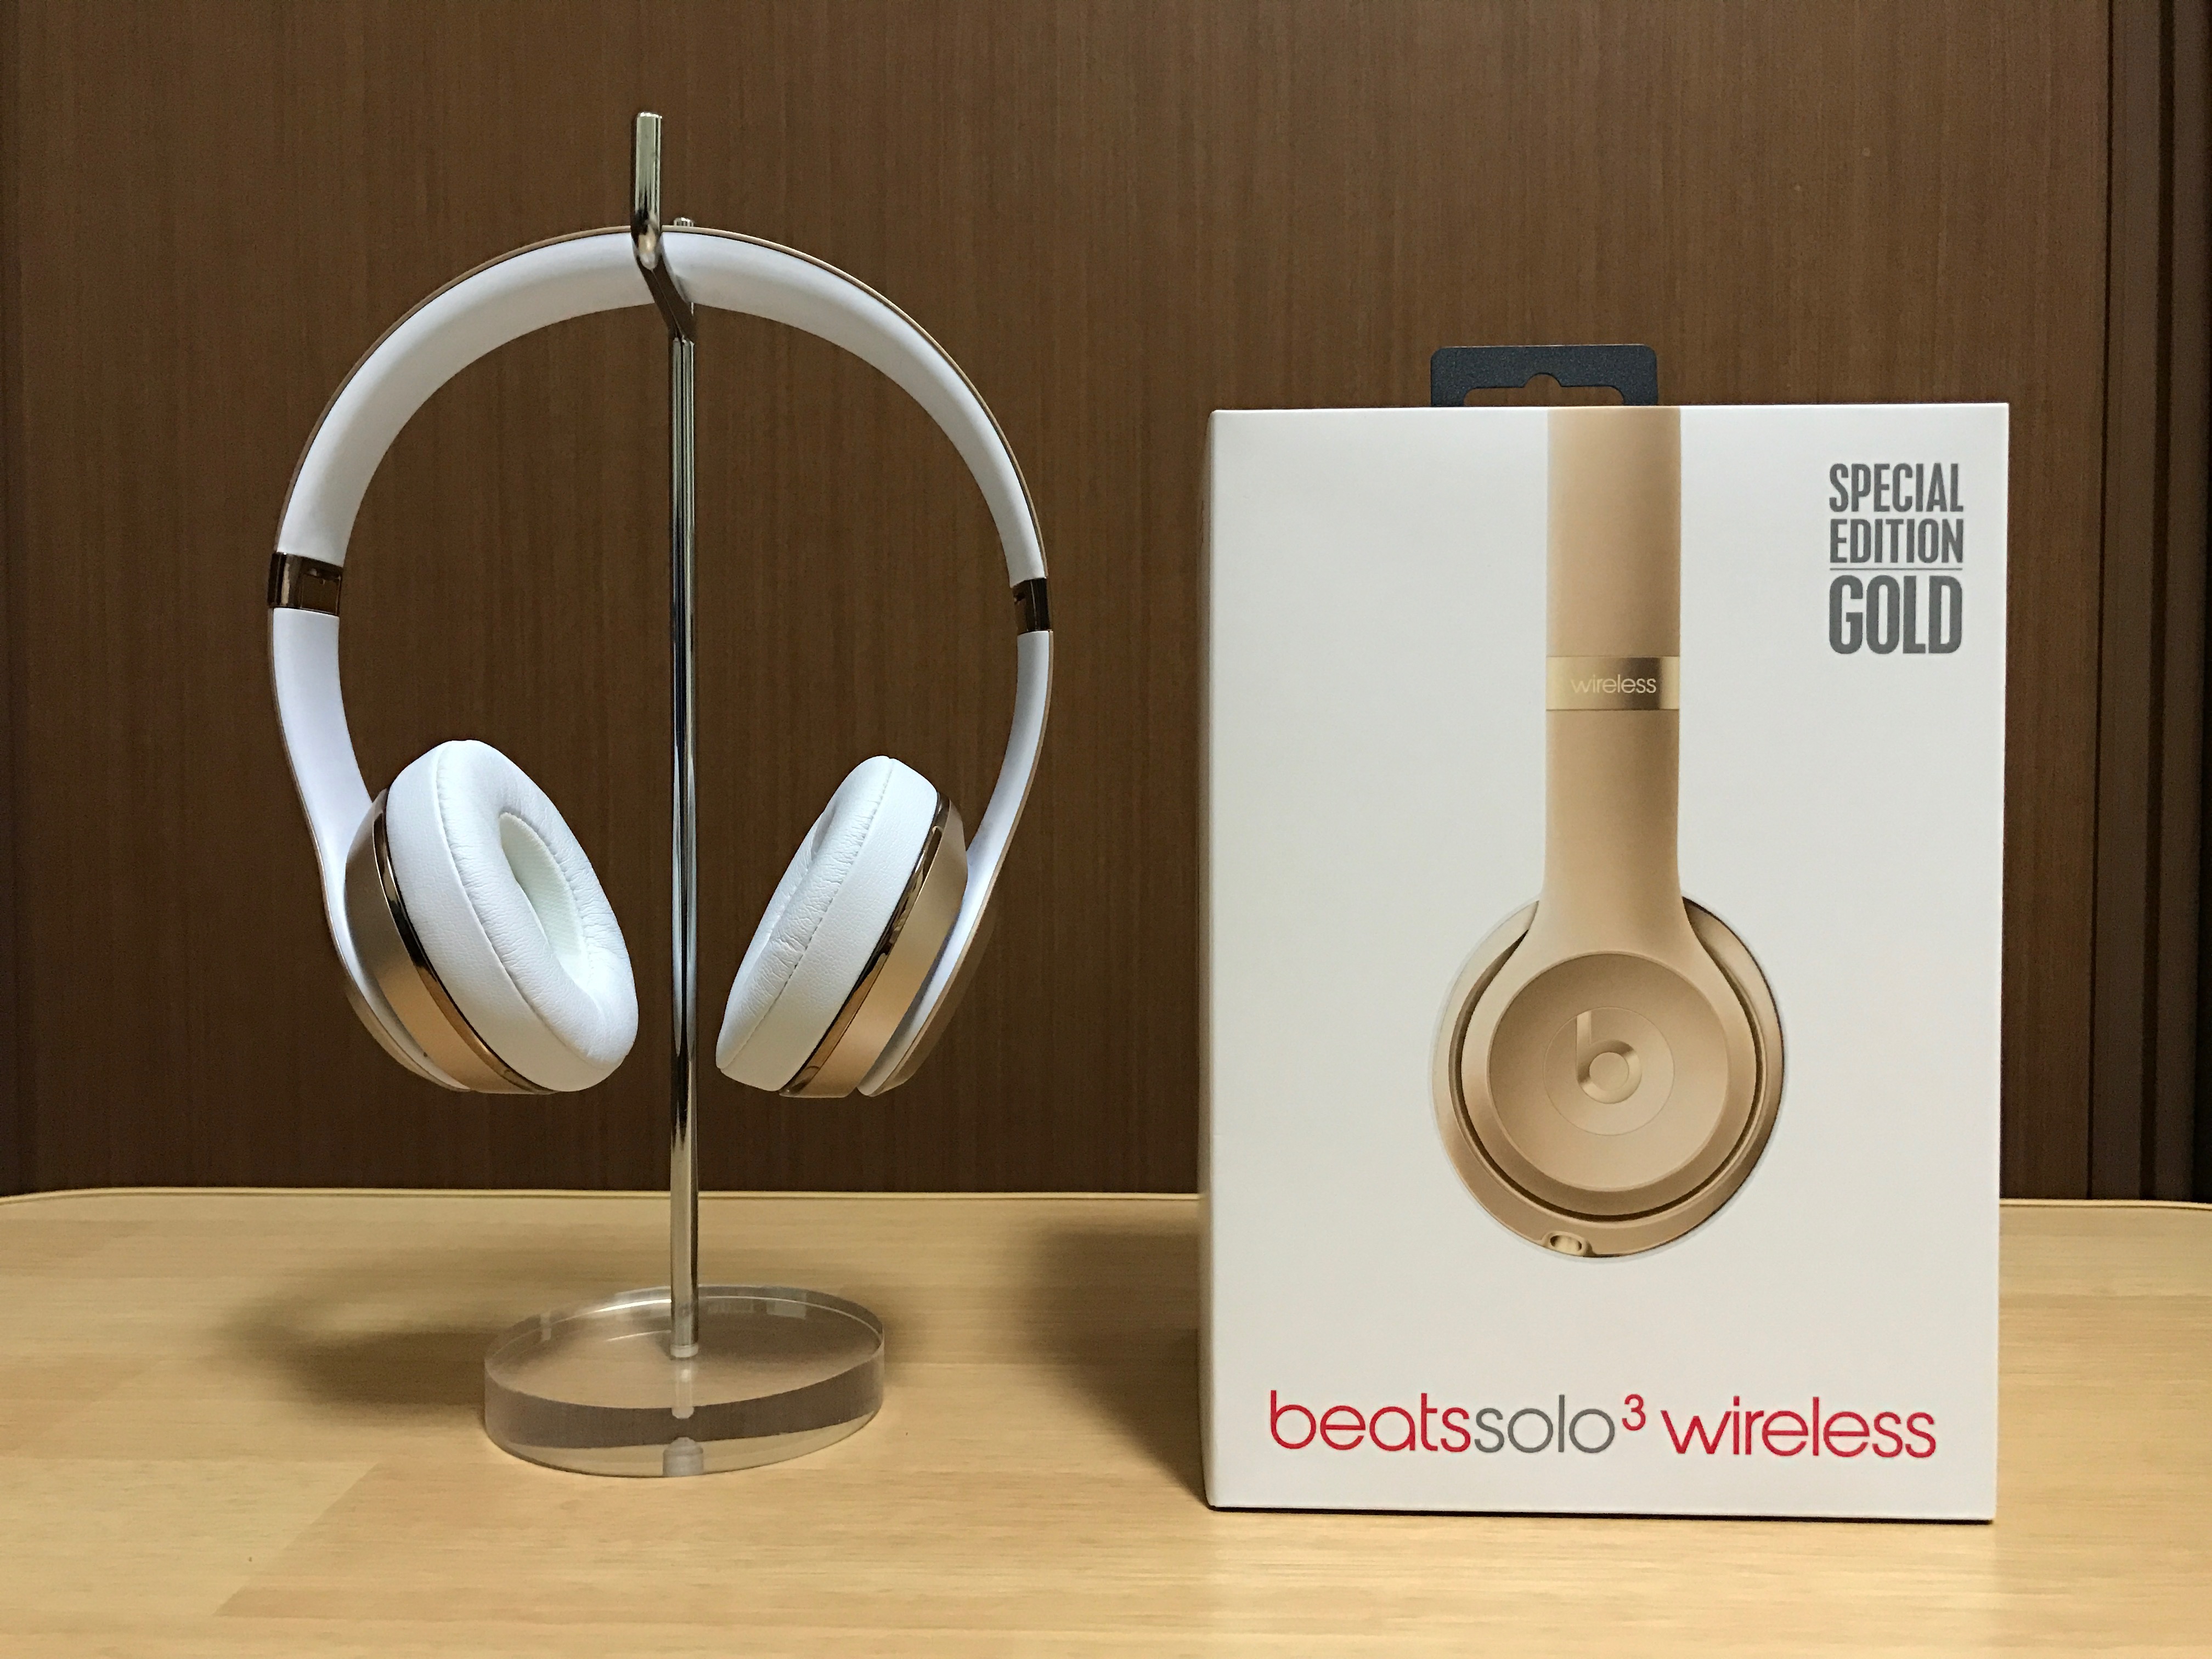 Beats By Dre「Beats Solo3 ワイヤレス」レビュー。着実にアップデート 